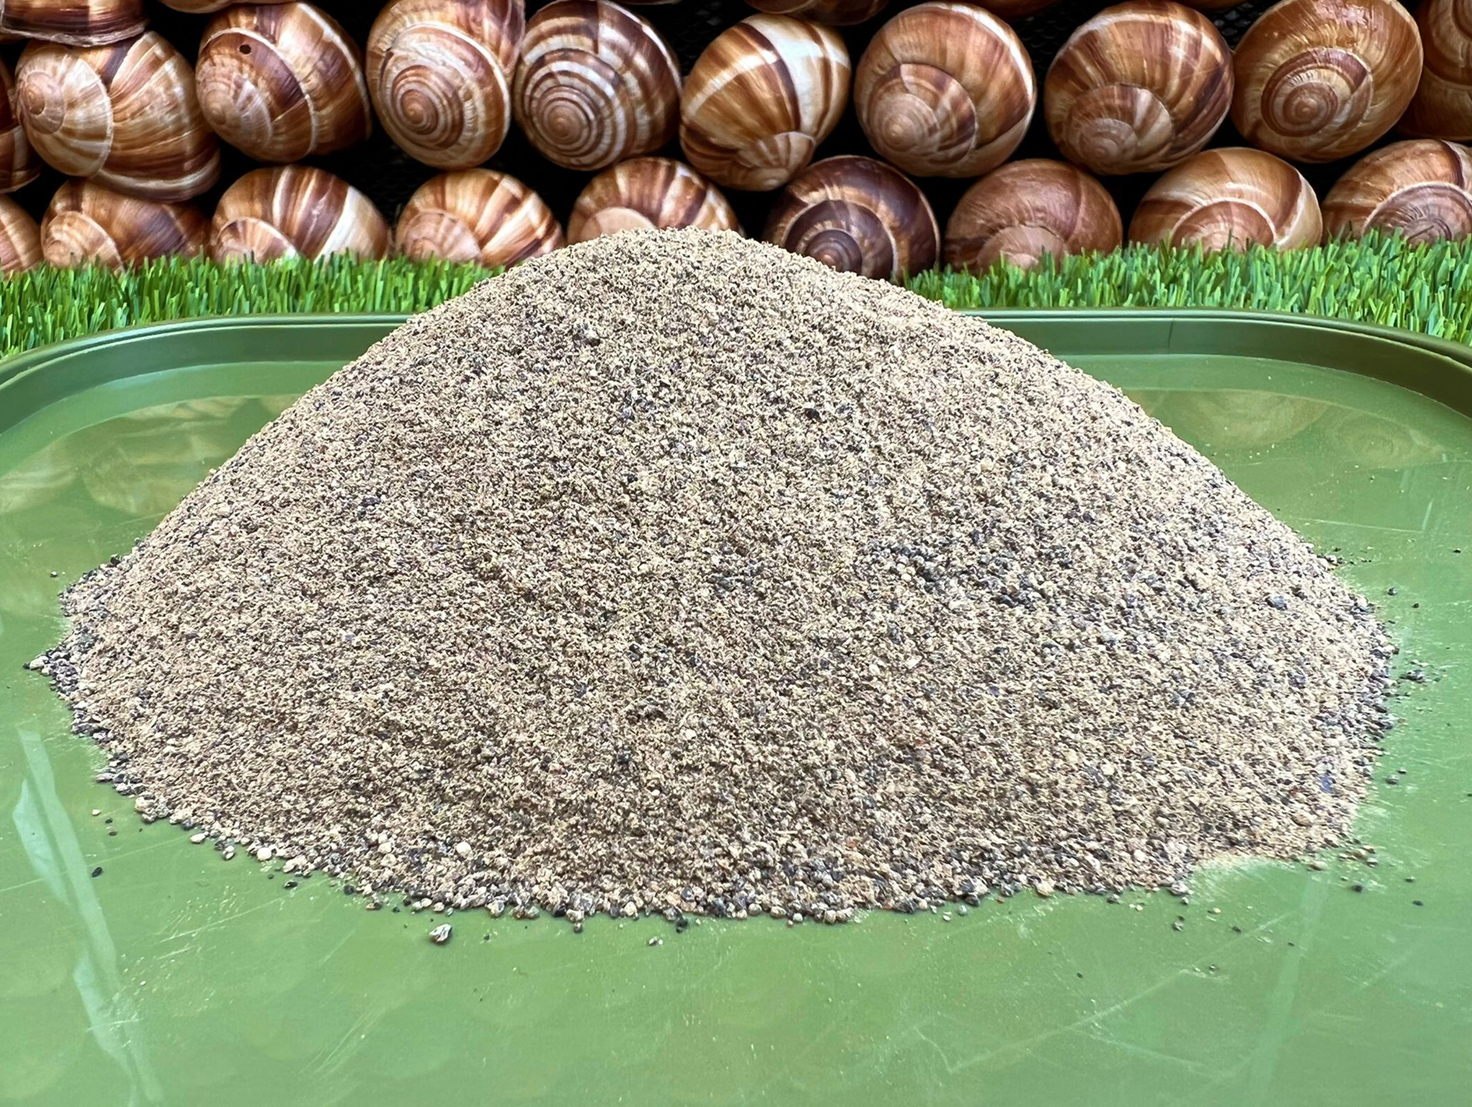 Picture of powdered snail meat